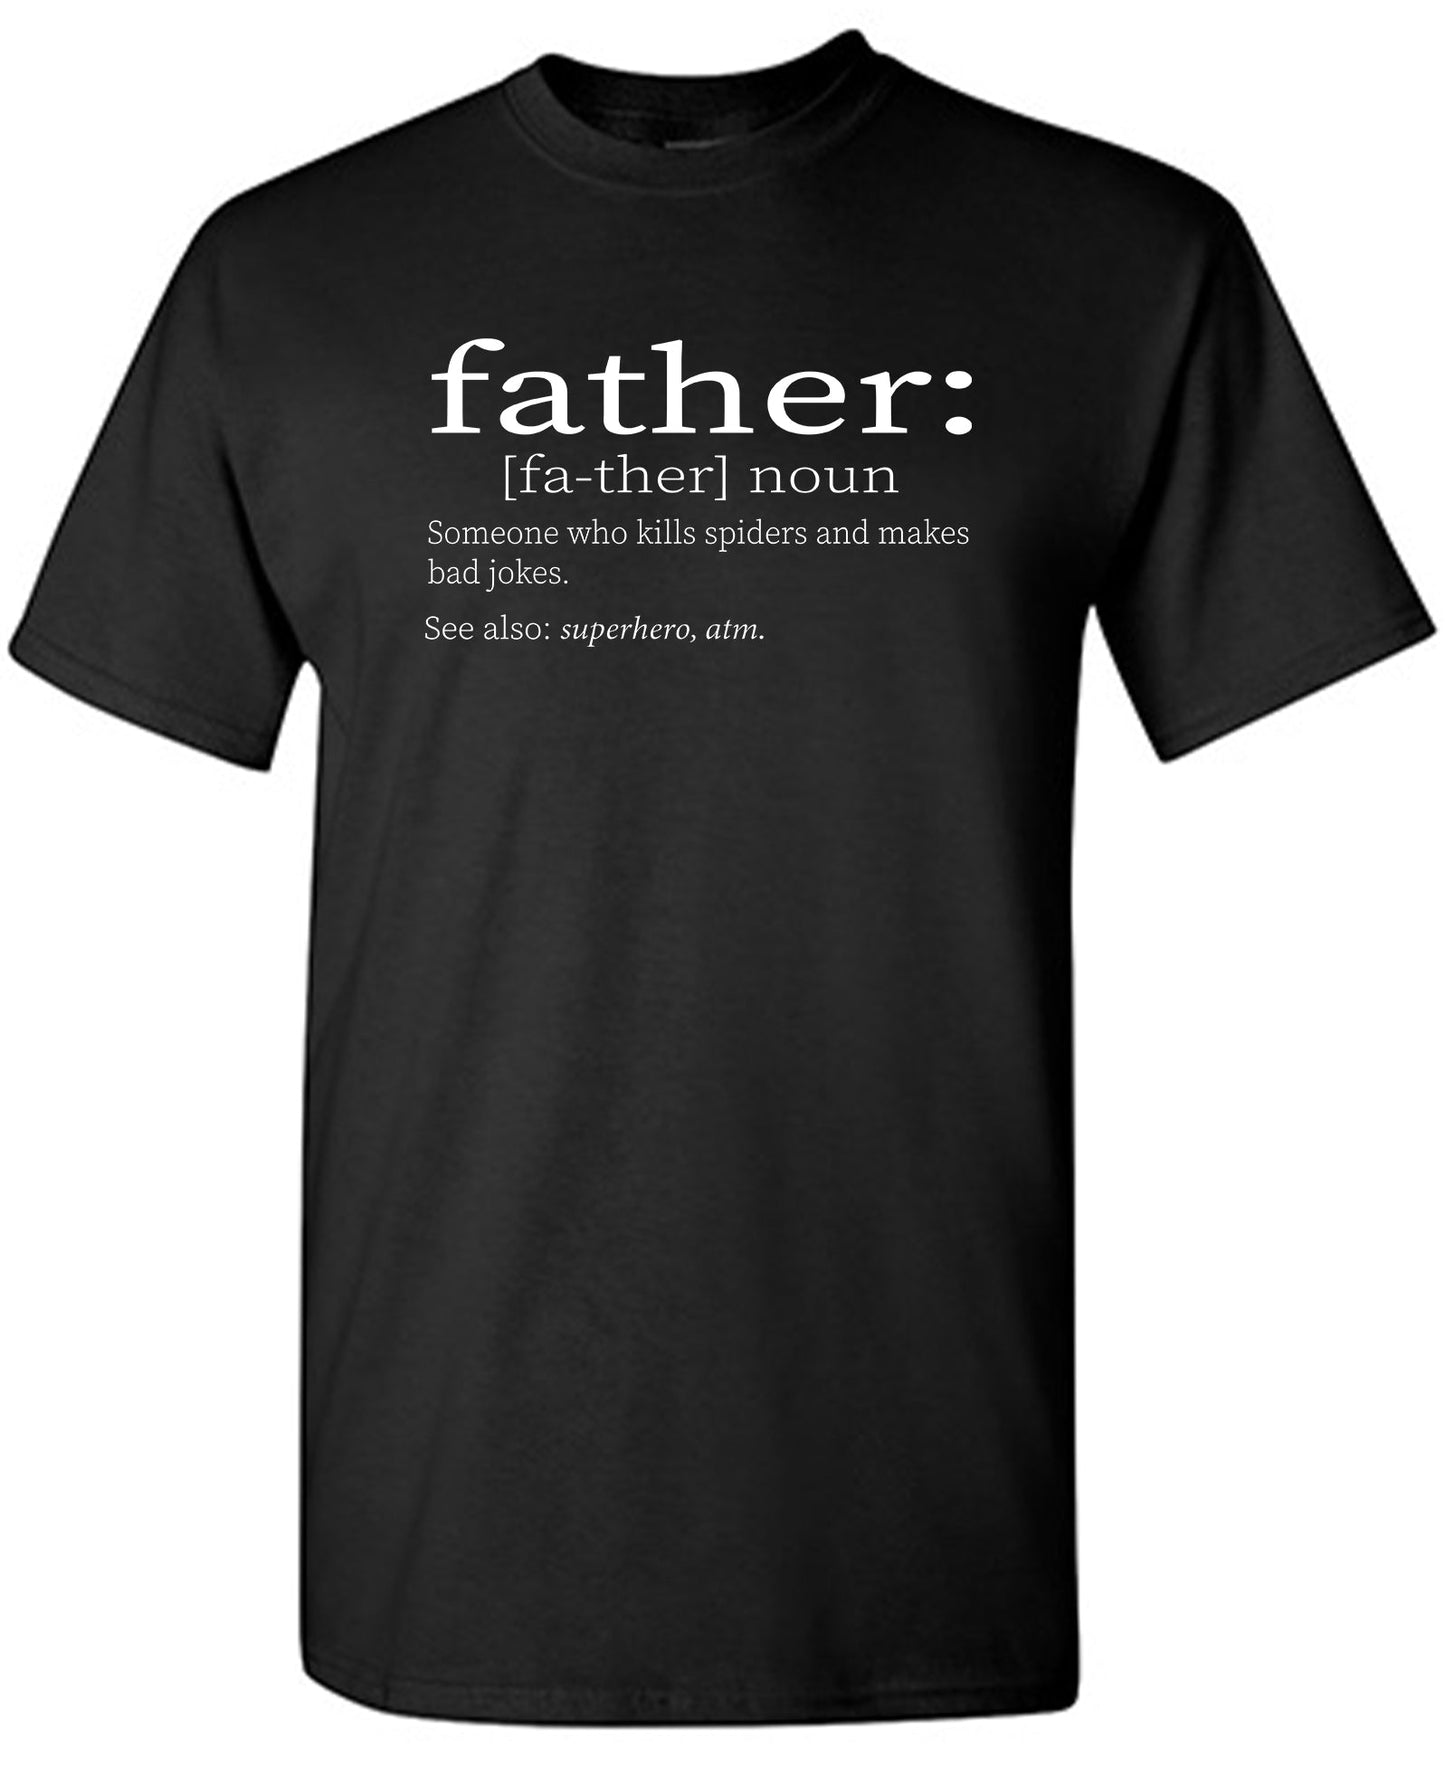 Father: Someone Who Kills Spiders And Makes Bad Jokes. - Funny T Shirts & Graphic Tees